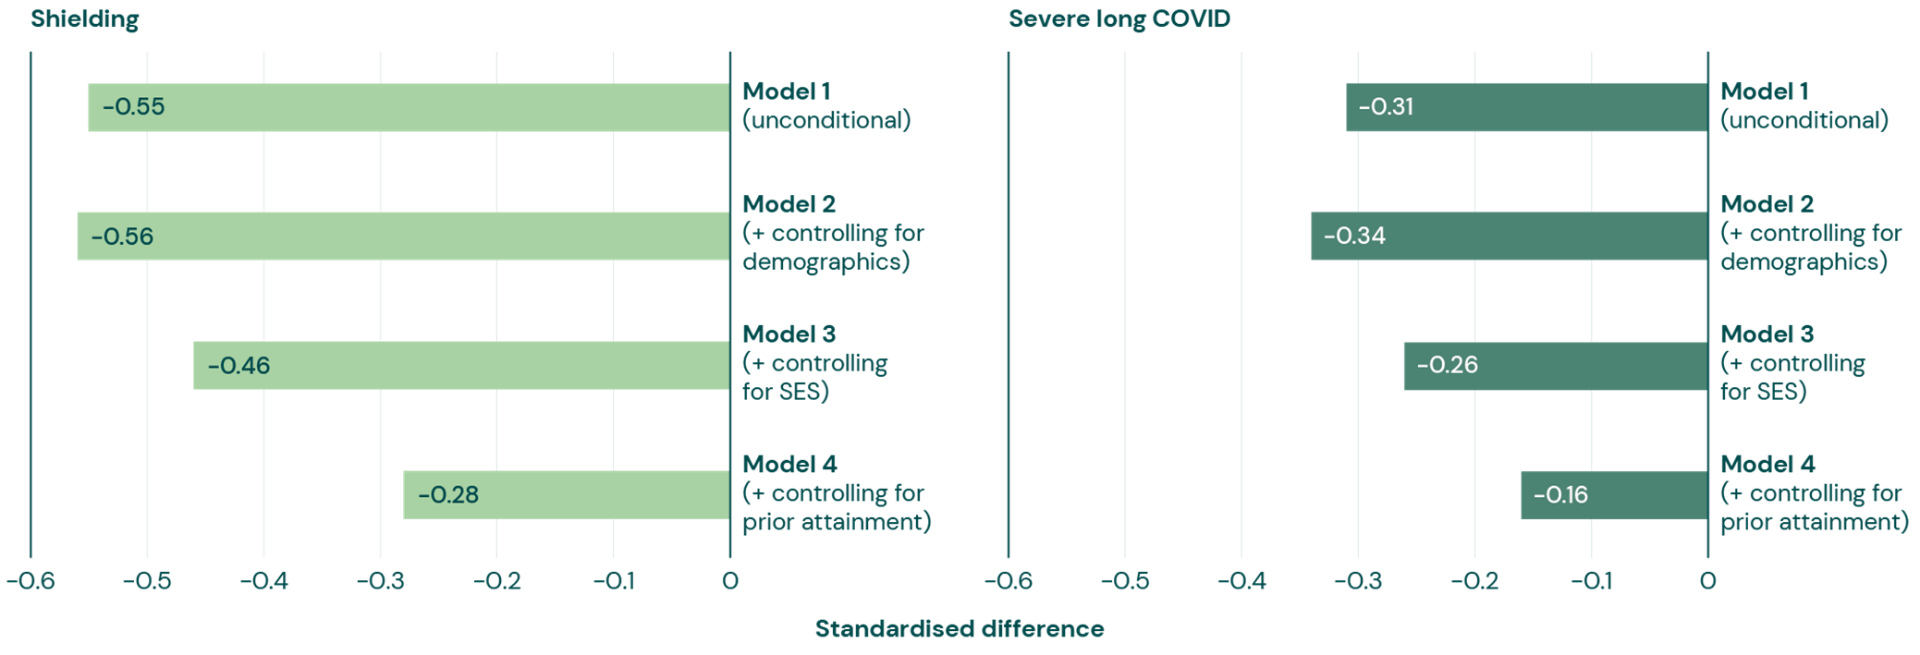 Graph showing differences in GCSE teacher assessed grades by shielding status and severe long COVID, as described in the text.